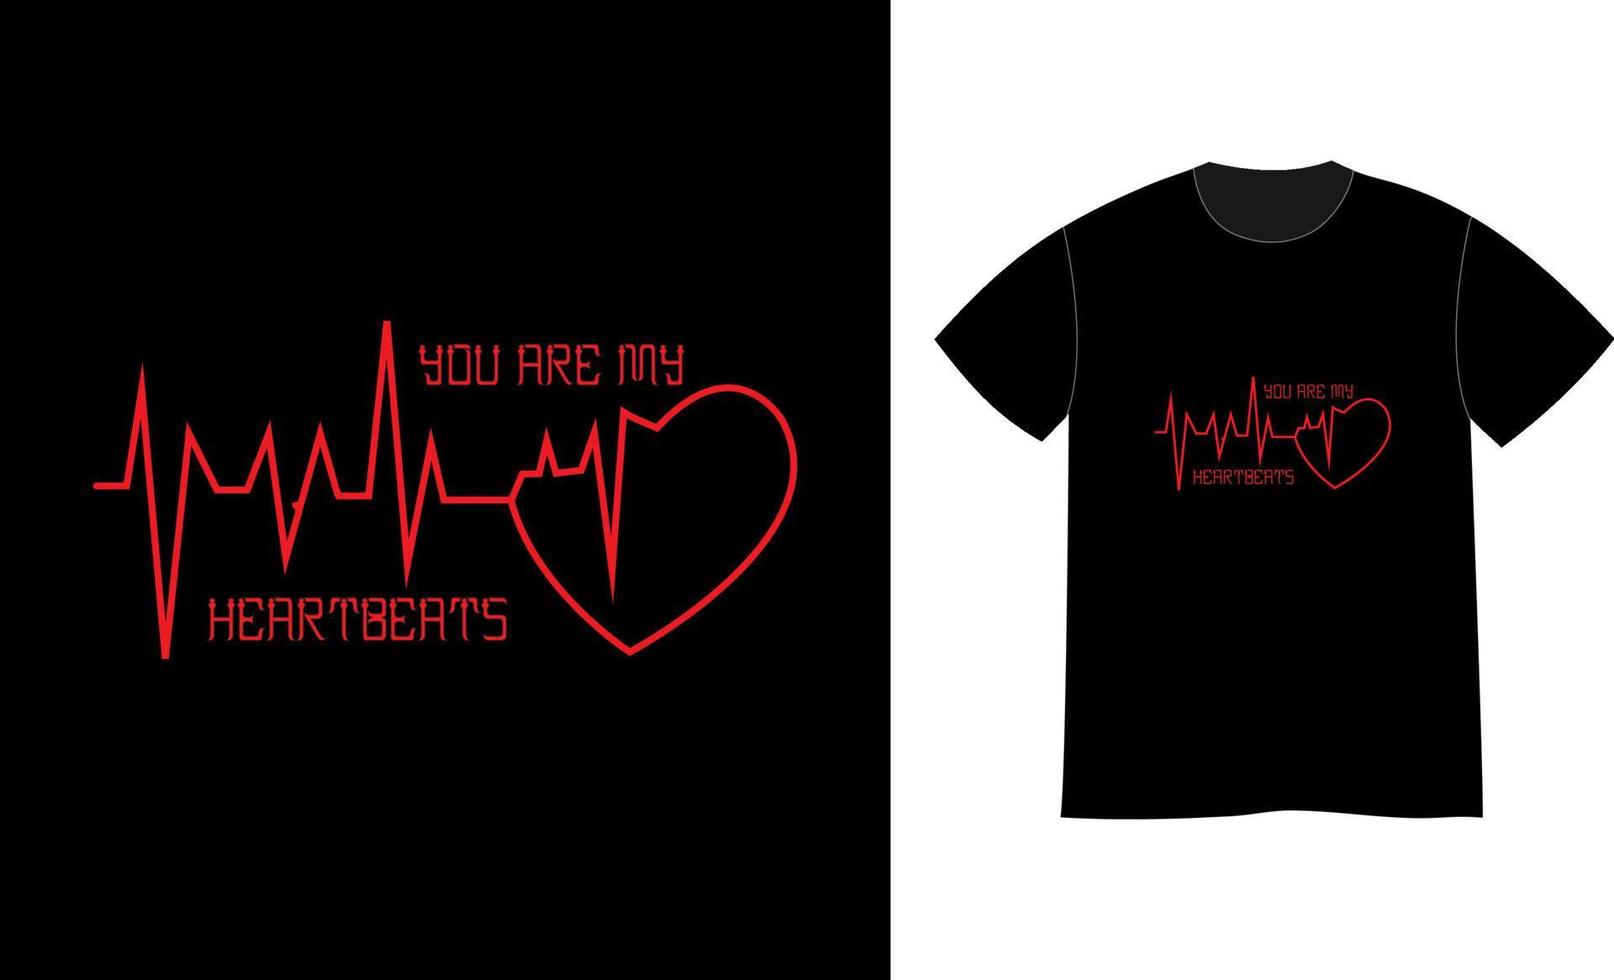 You are my heartbeat quote typographic t shirt design template vector